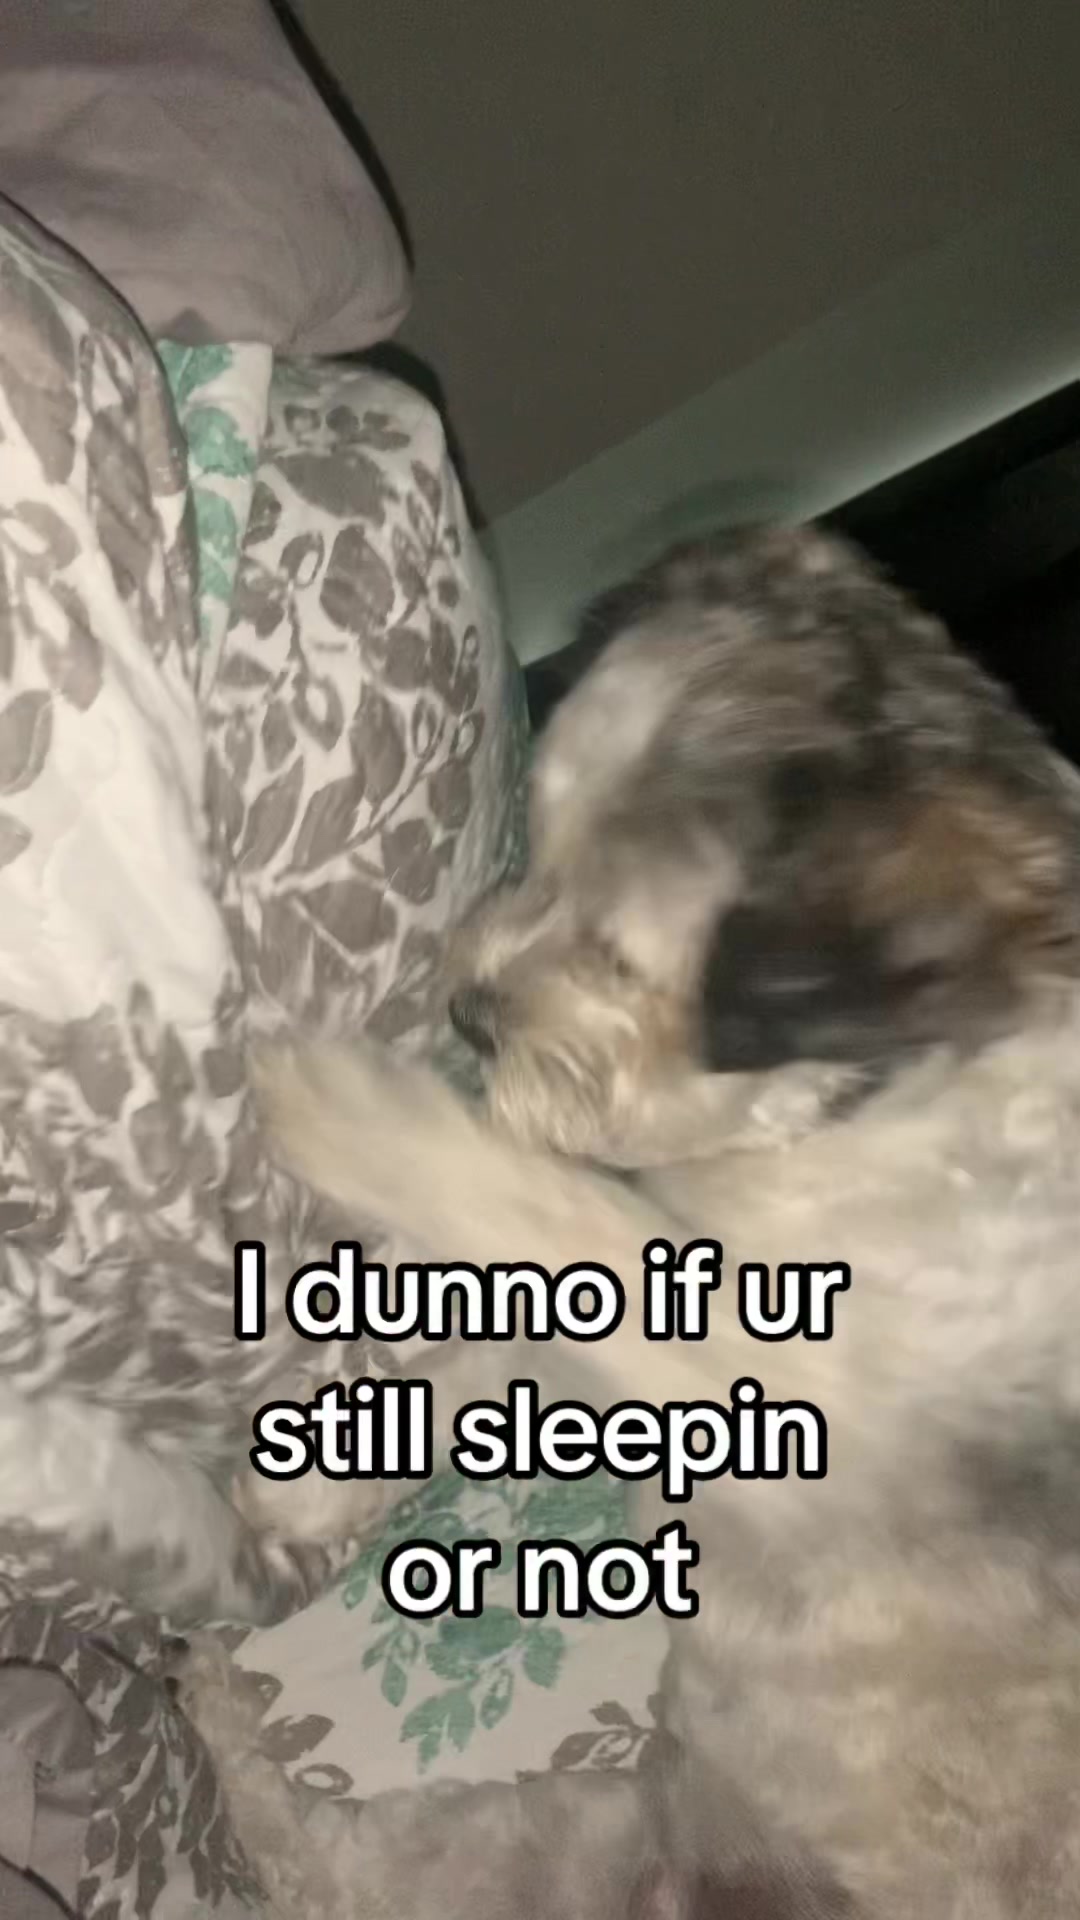 @Zoey The Shichon